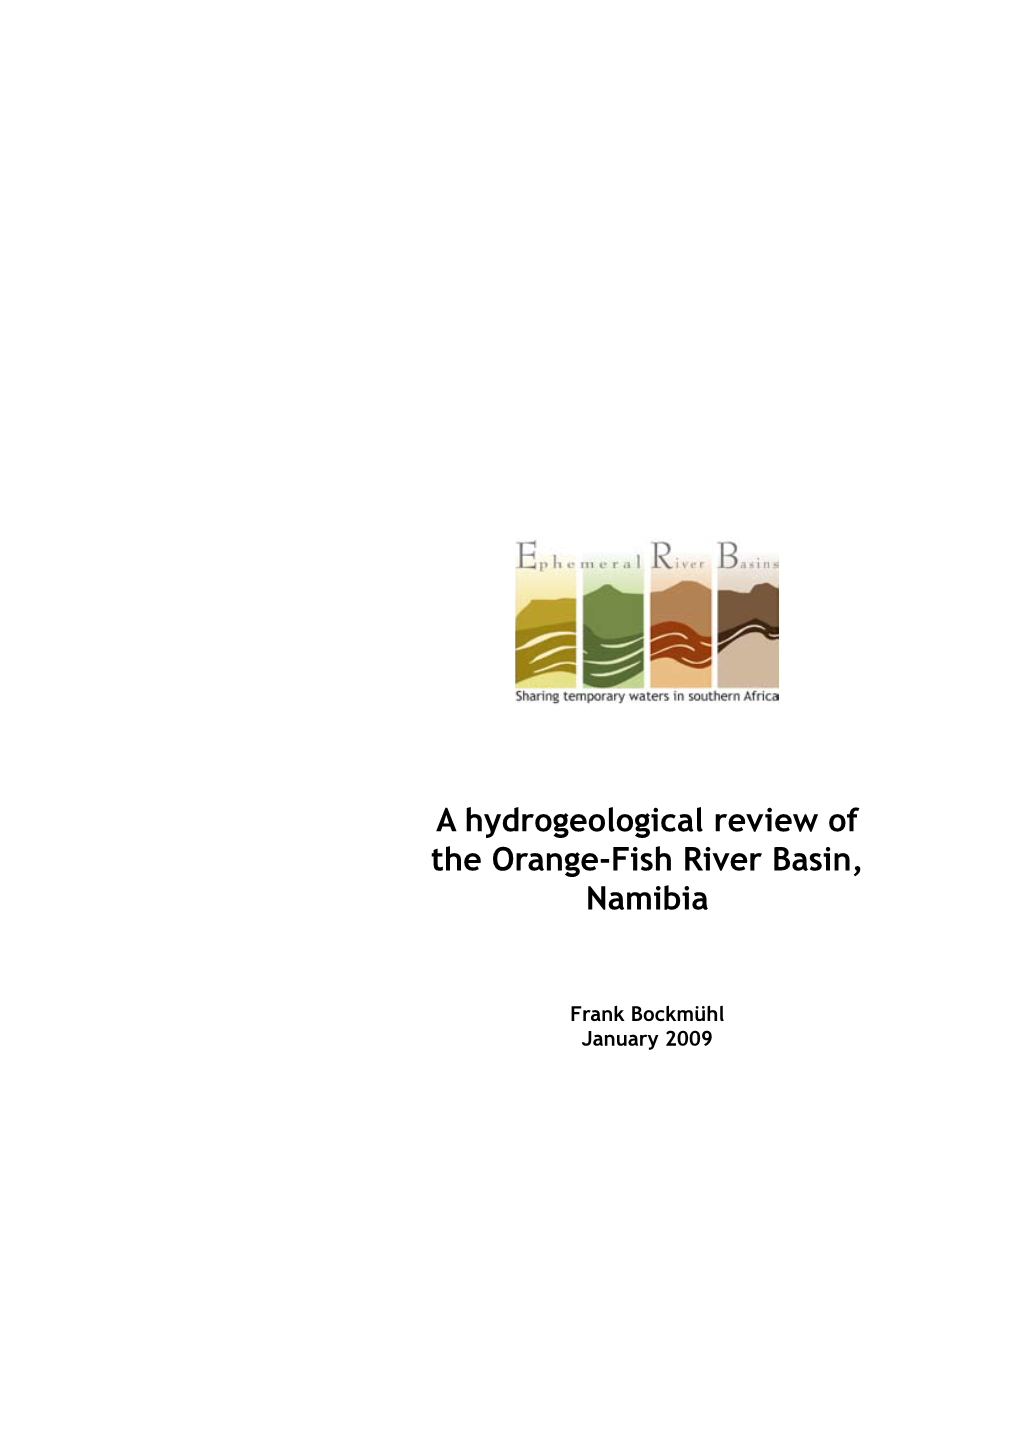 A Hydrogeological Review of the Orange-Fish River Basin, Namibia